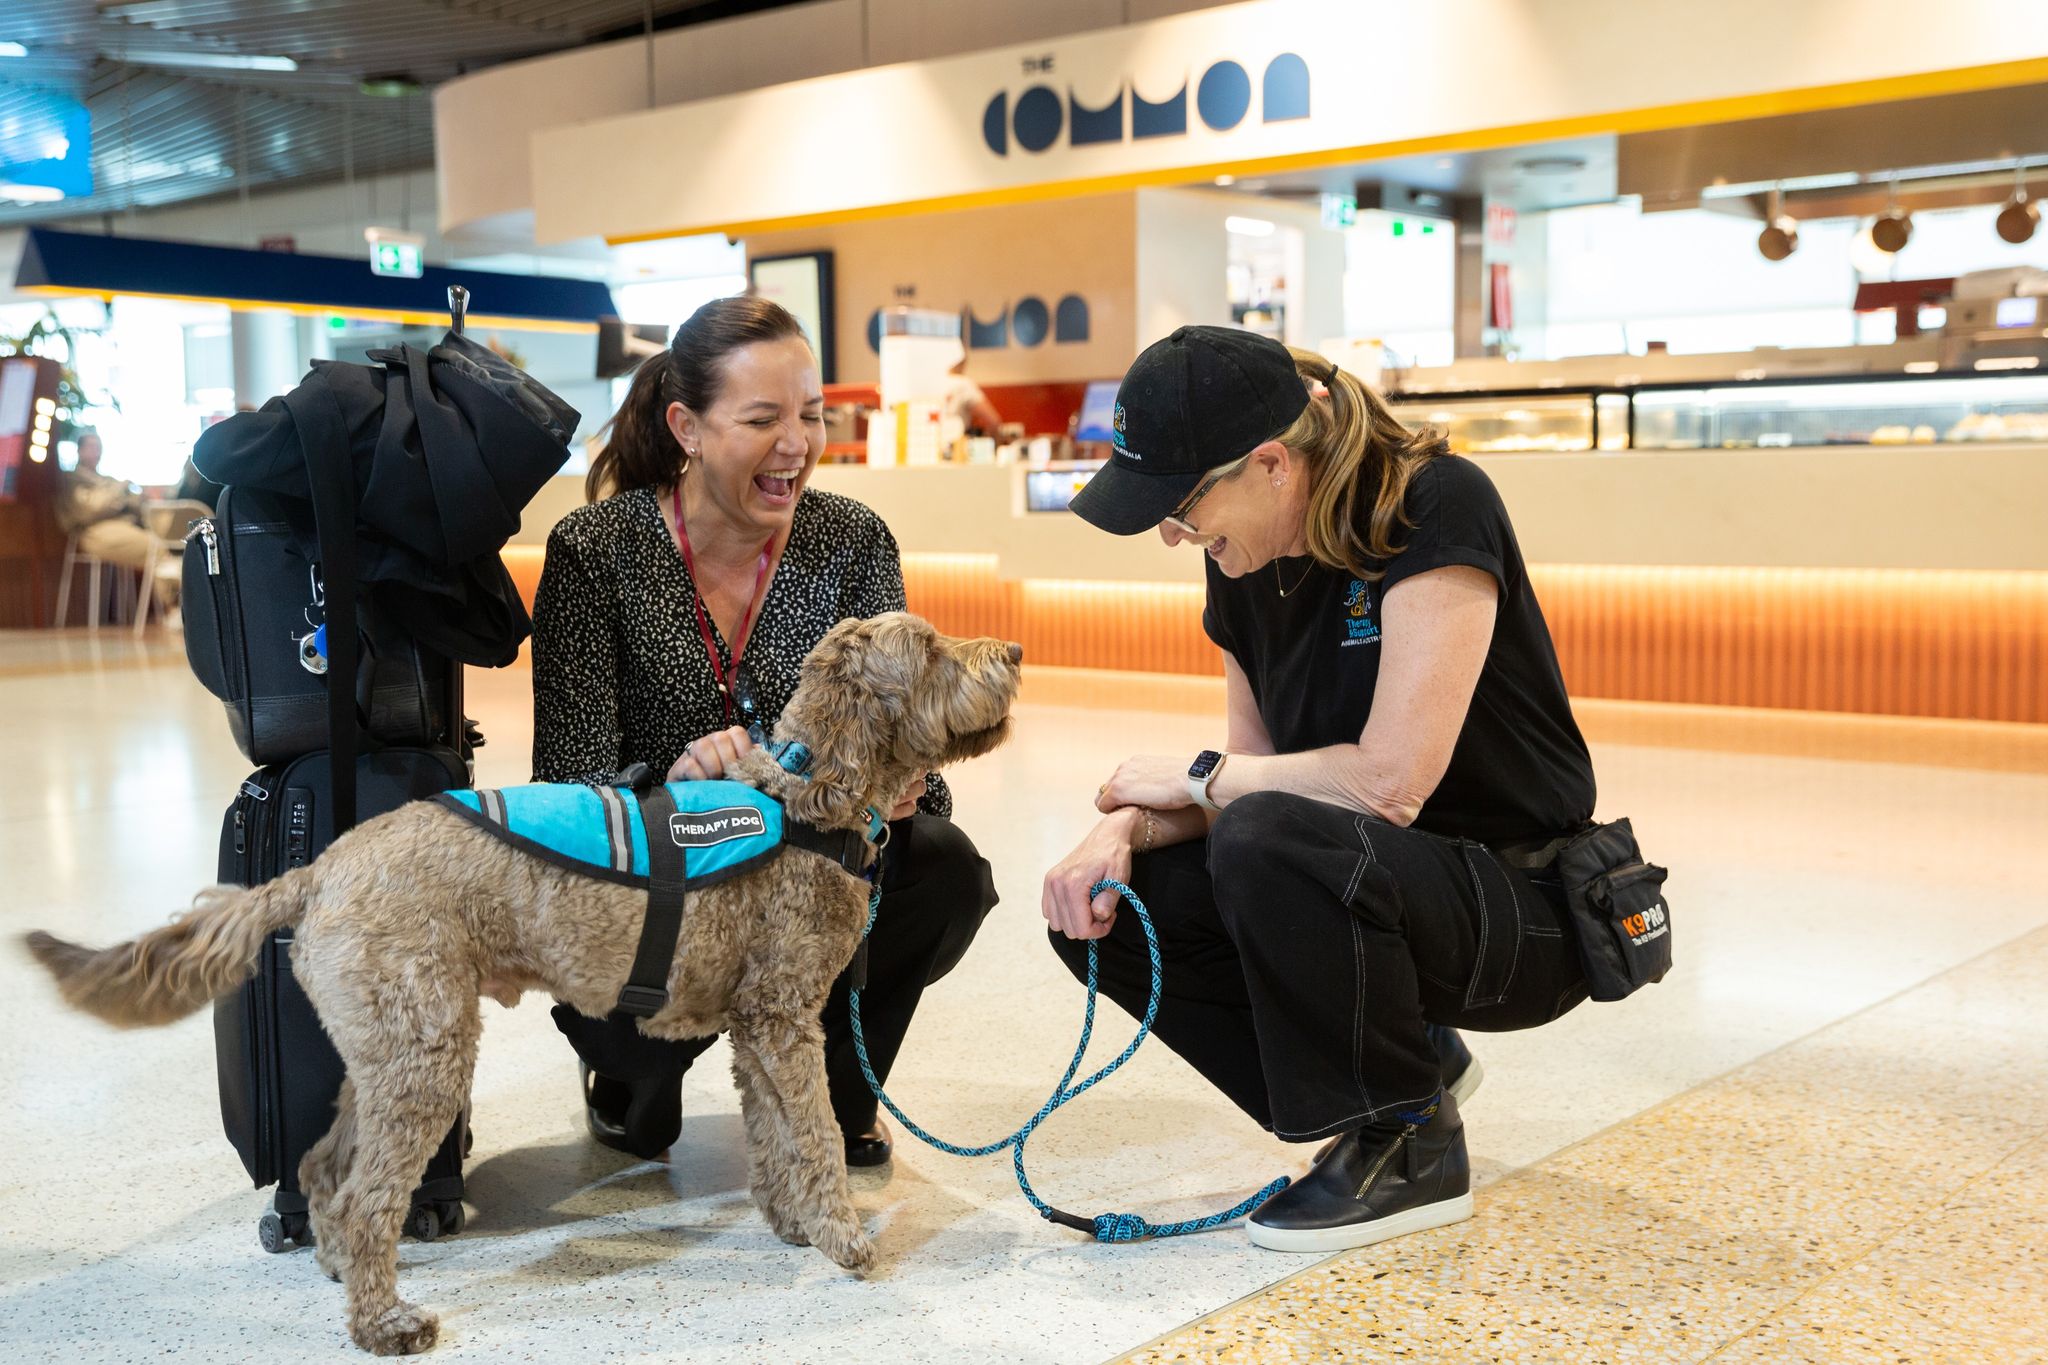 Passenger stopping to pet a therapy dog who is being held by his handler